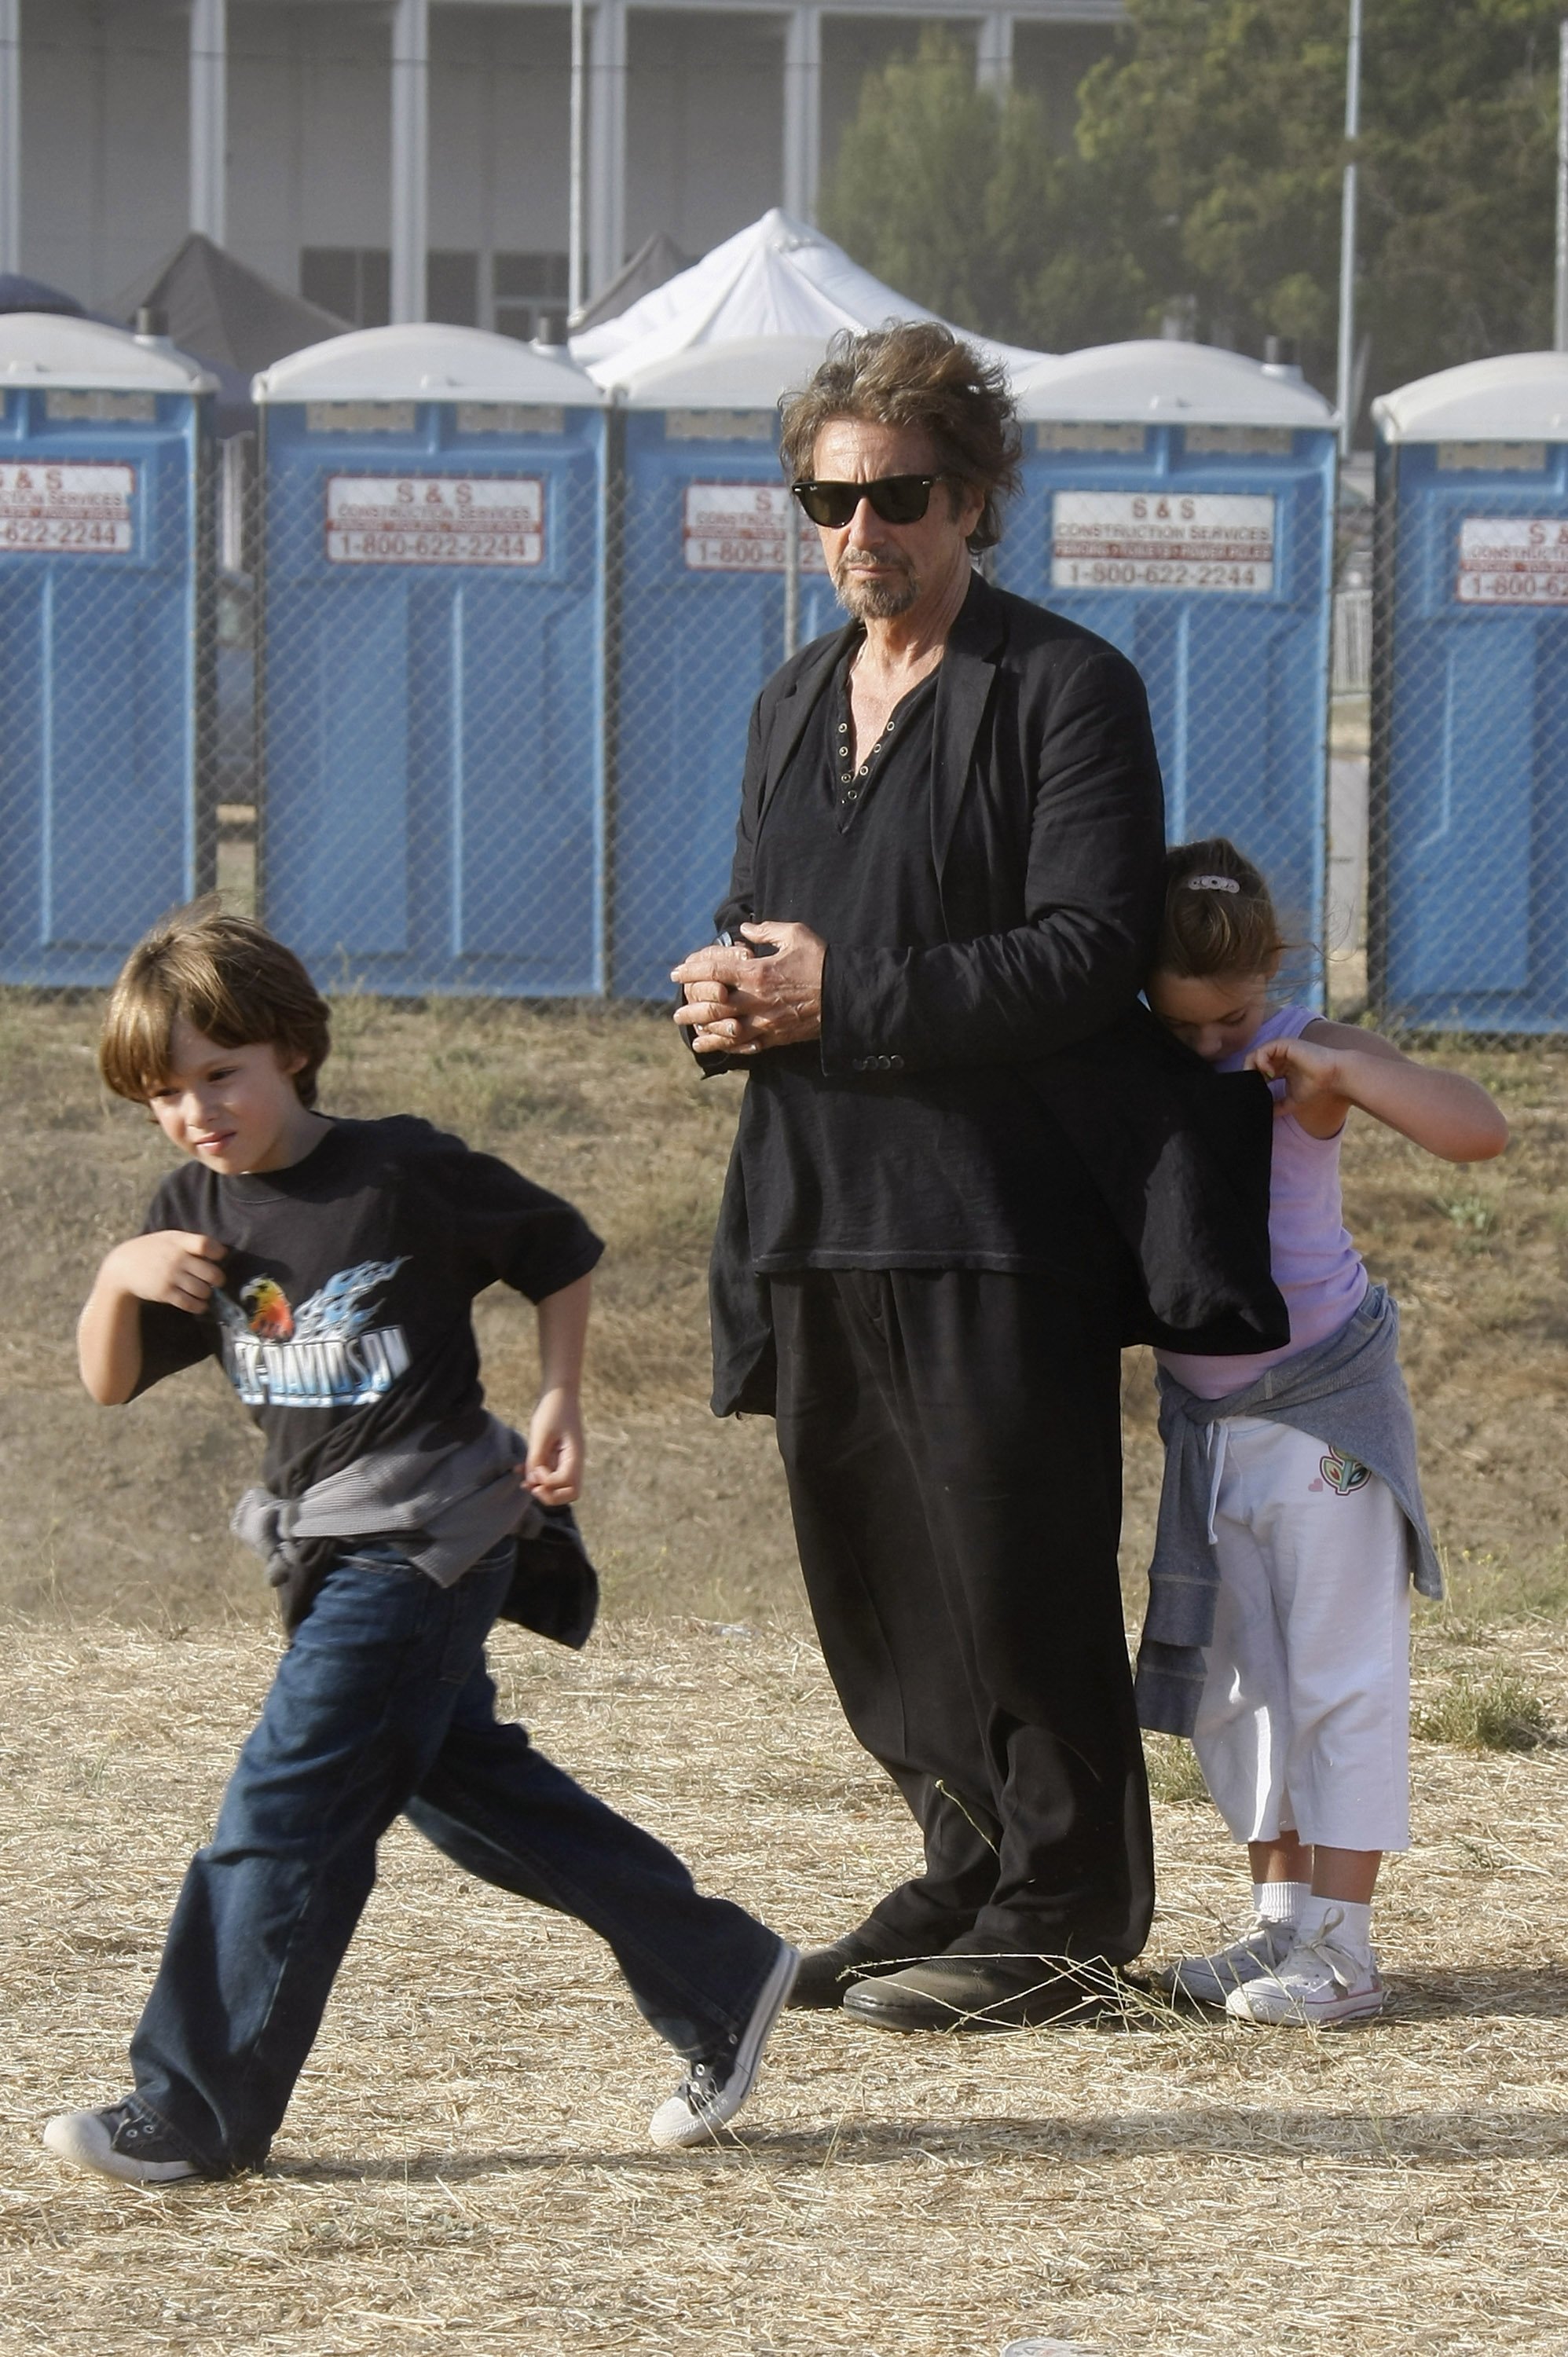 Al Pacino his son Anton James and his daughter Olivia Rose are seen at the Malibu Fair on August 31, 2008 in Malibu, California.| Source: Getty Images